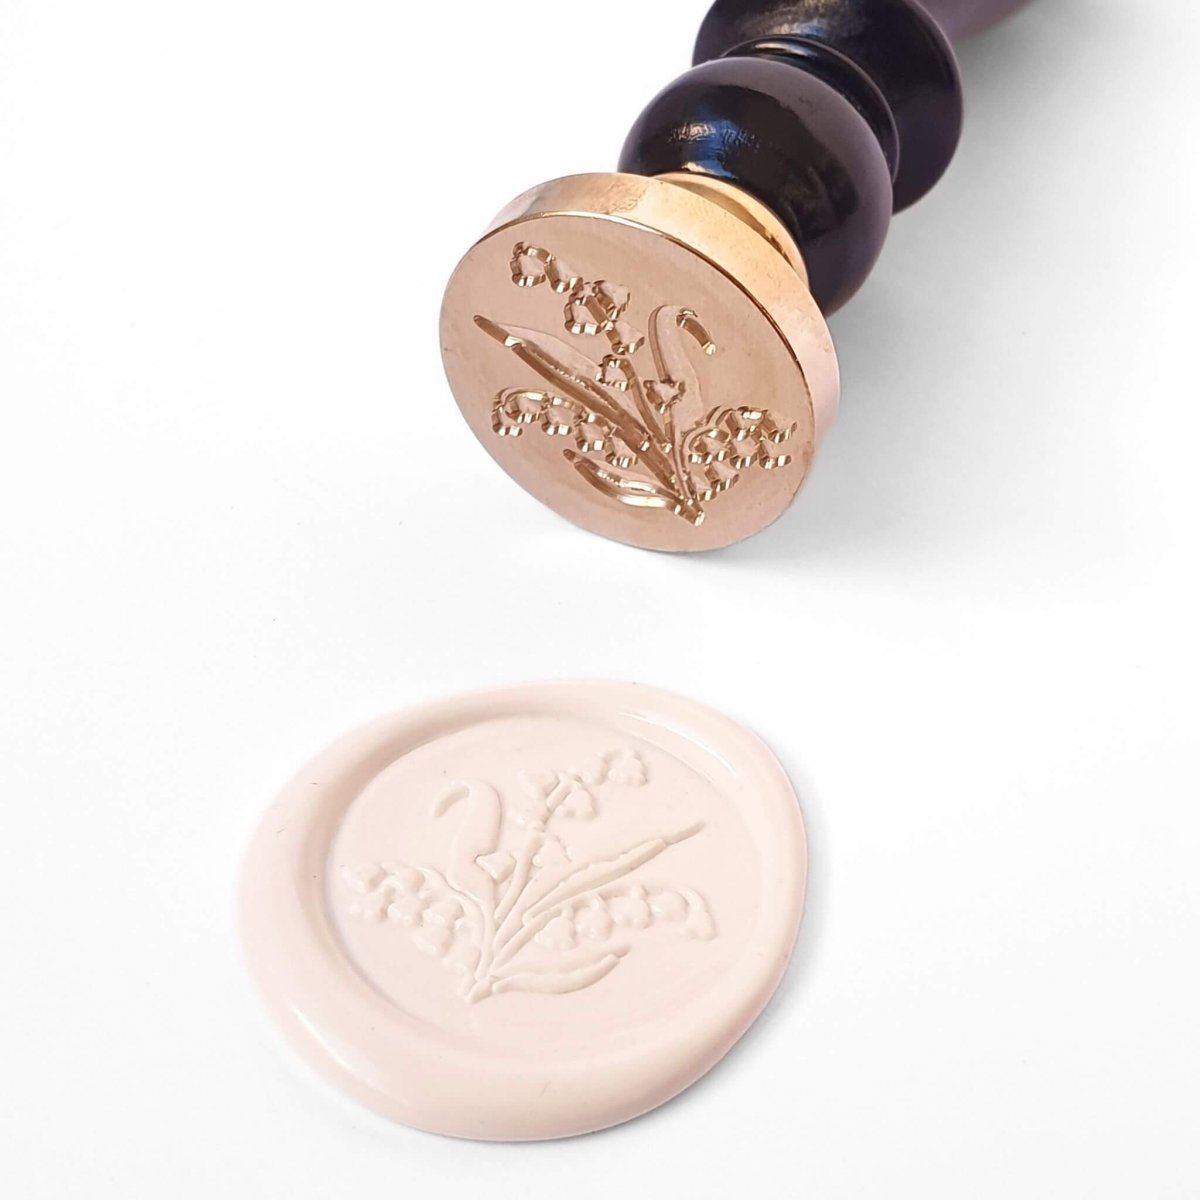 lily of the valley design on wax seal